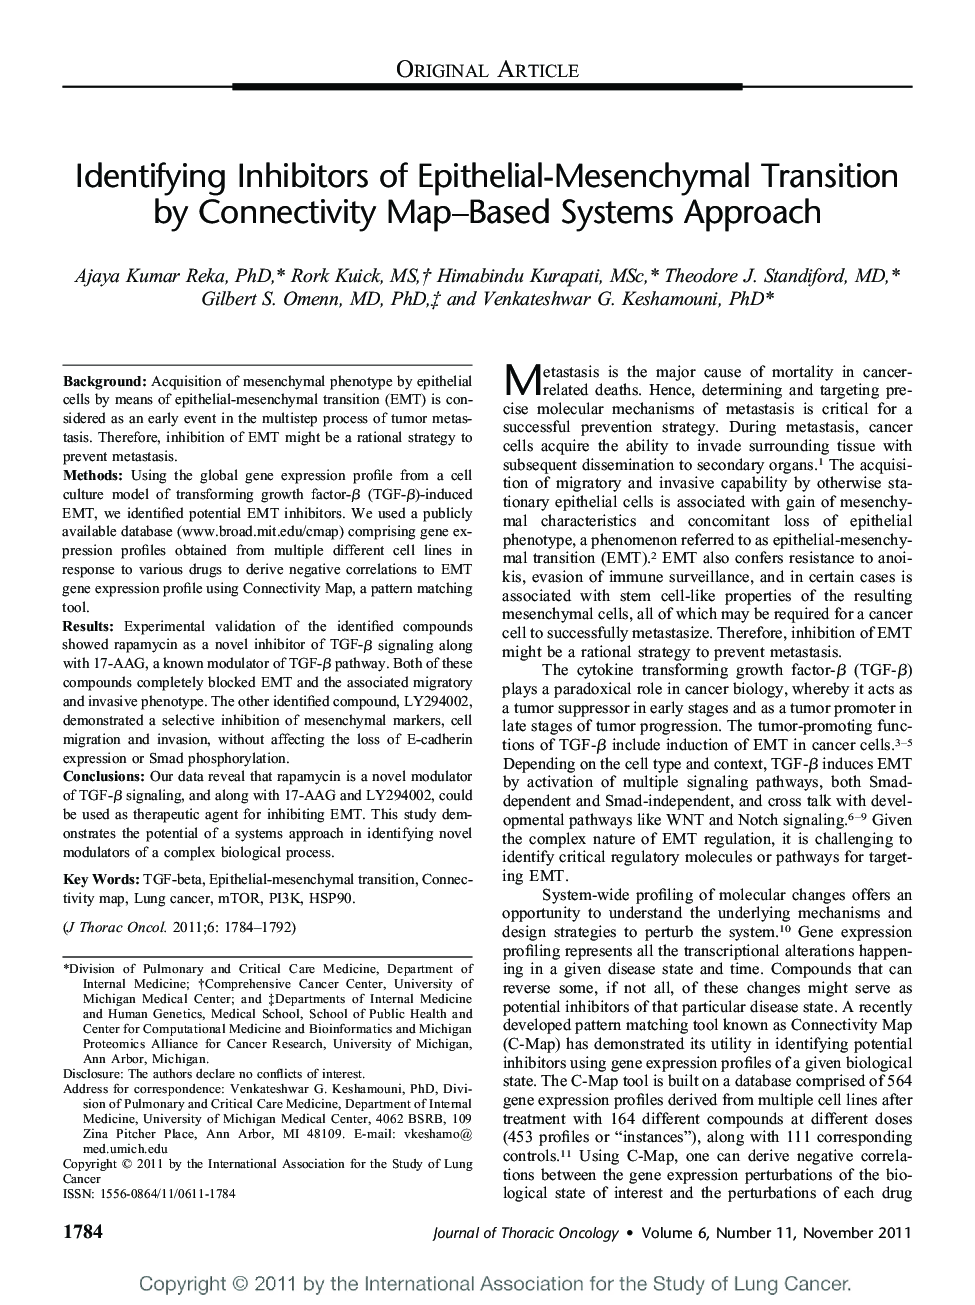 Identifying Inhibitors of Epithelial-Mesenchymal Transition by Connectivity Map–Based Systems Approach 